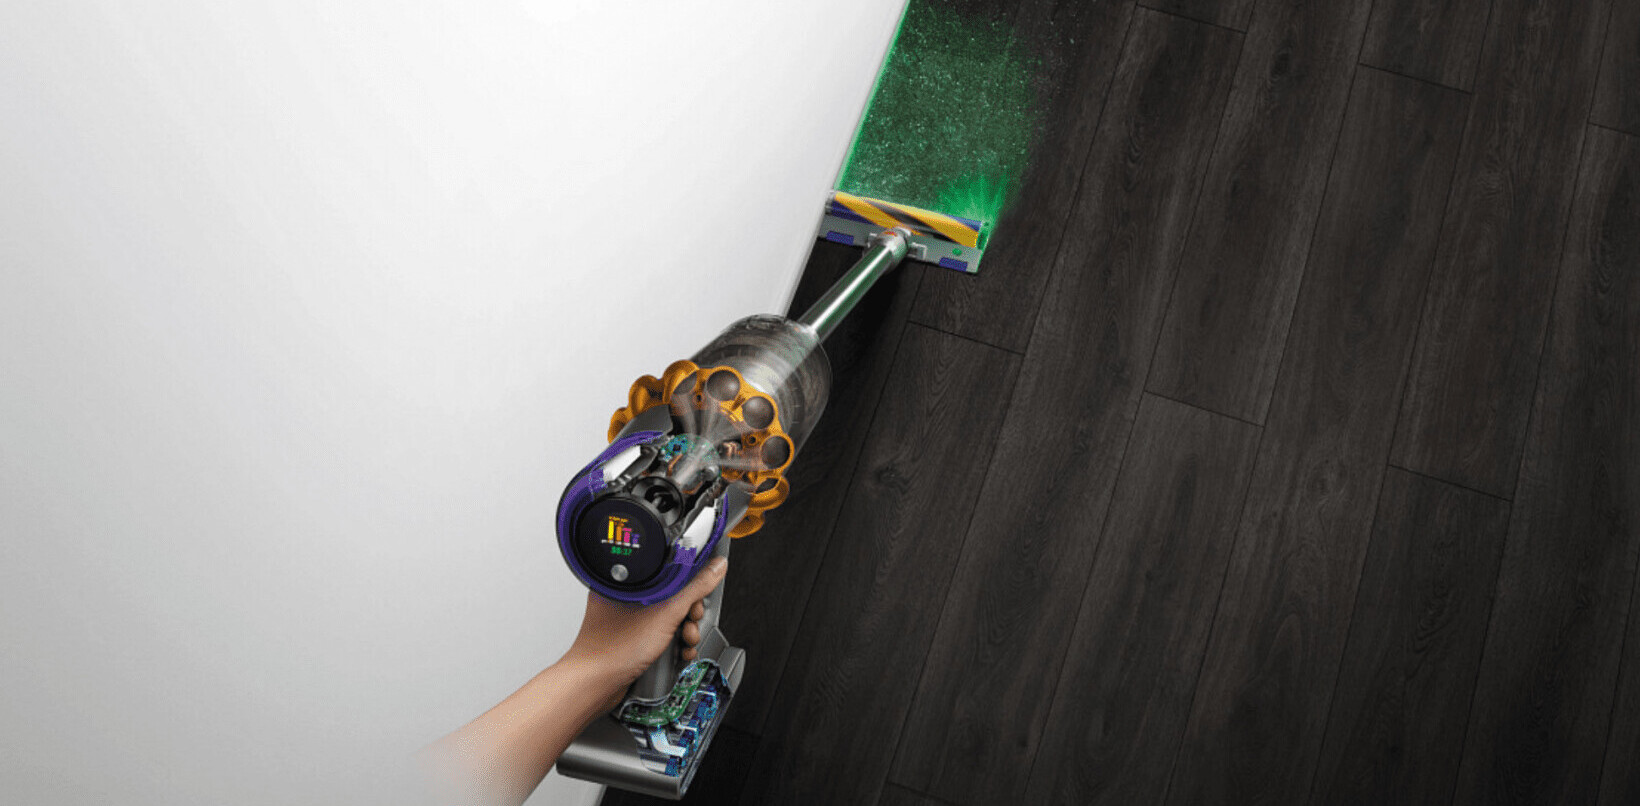 Dyson’s V15 Detect vacuum uses a green laser to light up your grimy floors